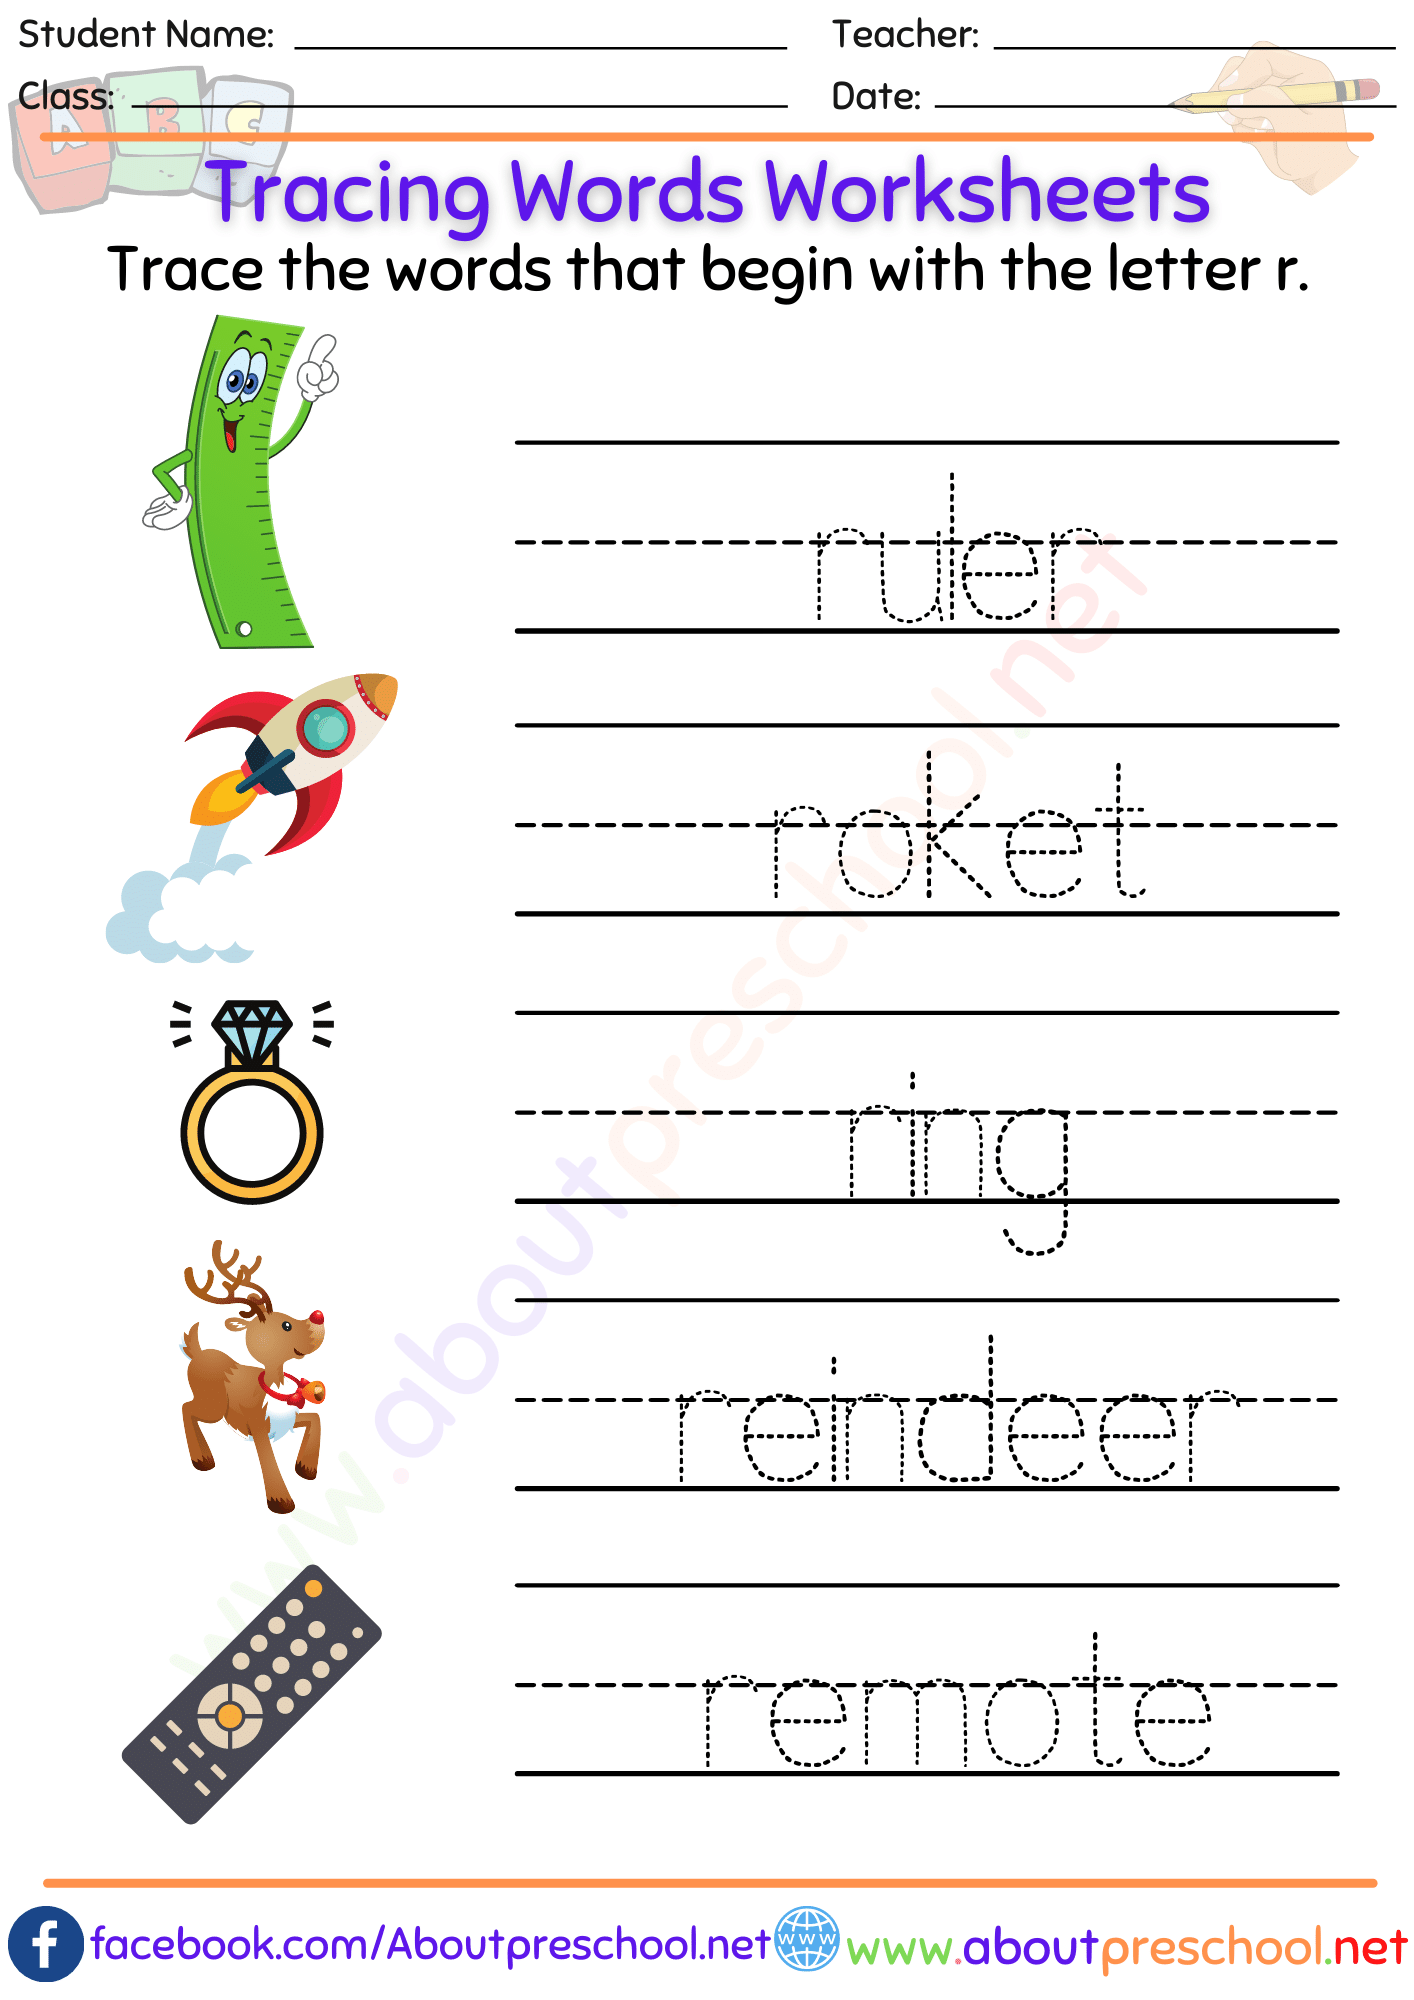 Tracing Words Worksheets-r